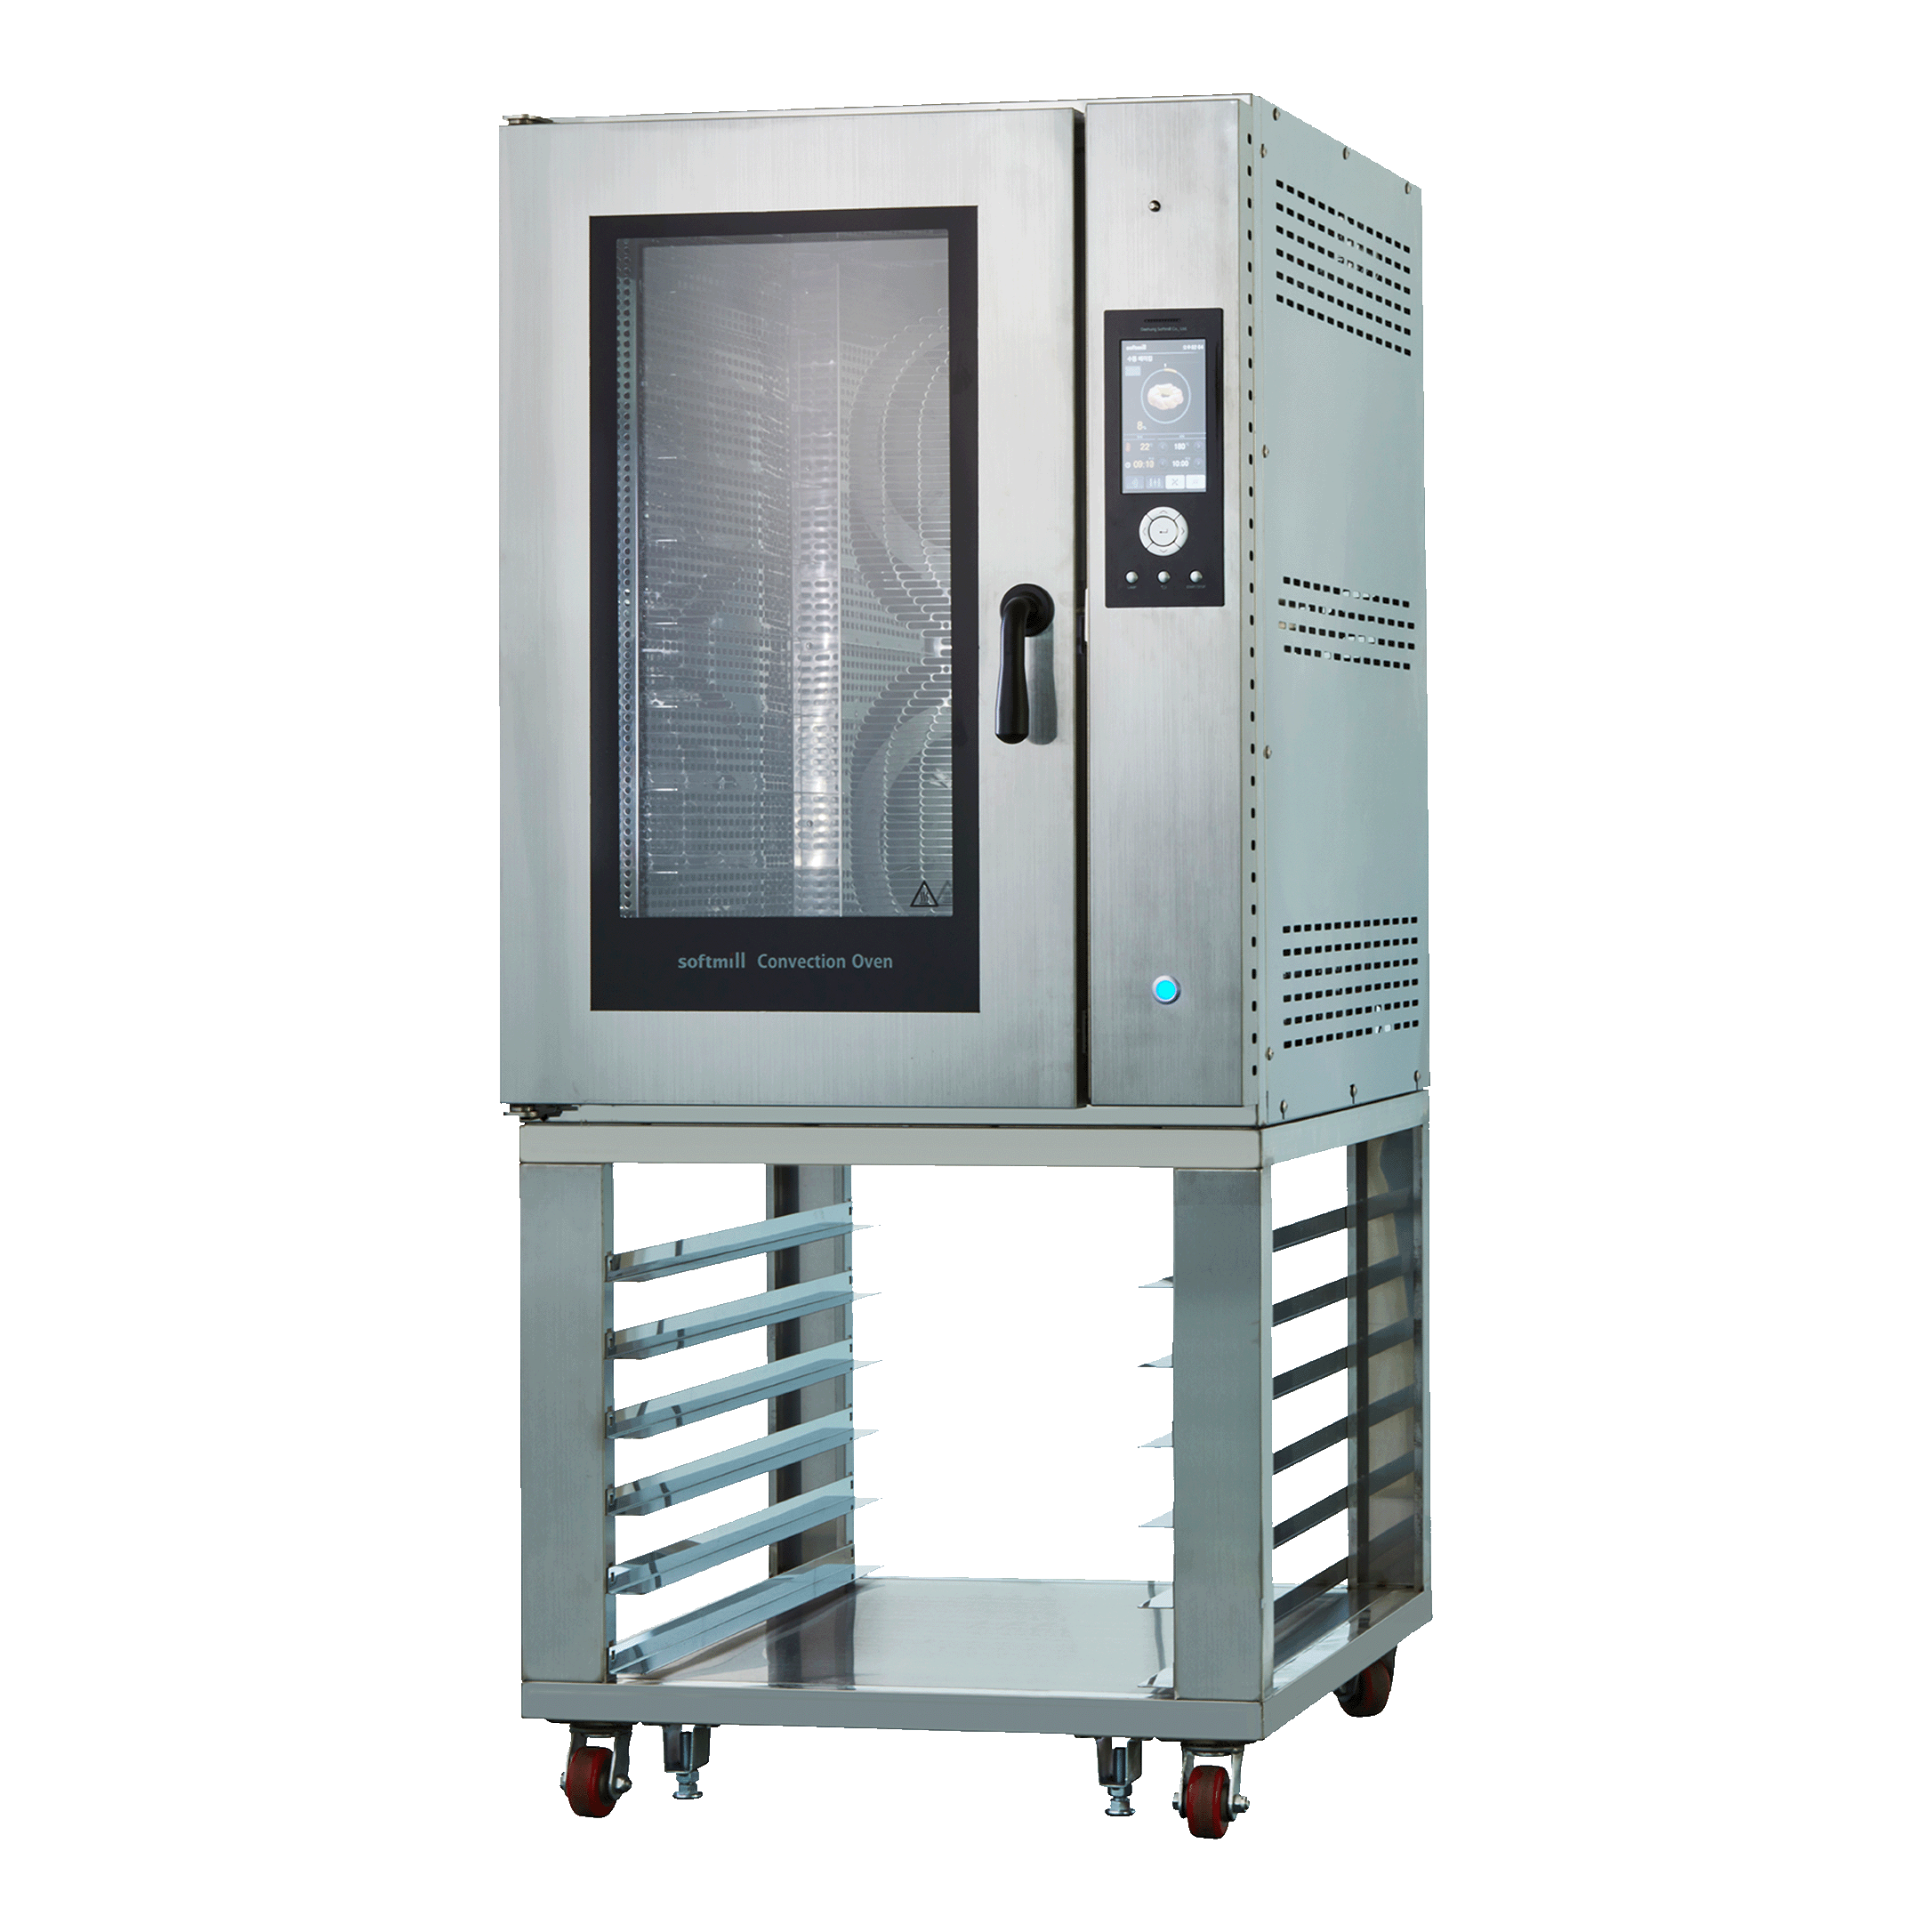 Convection Oven 10 trays size up images